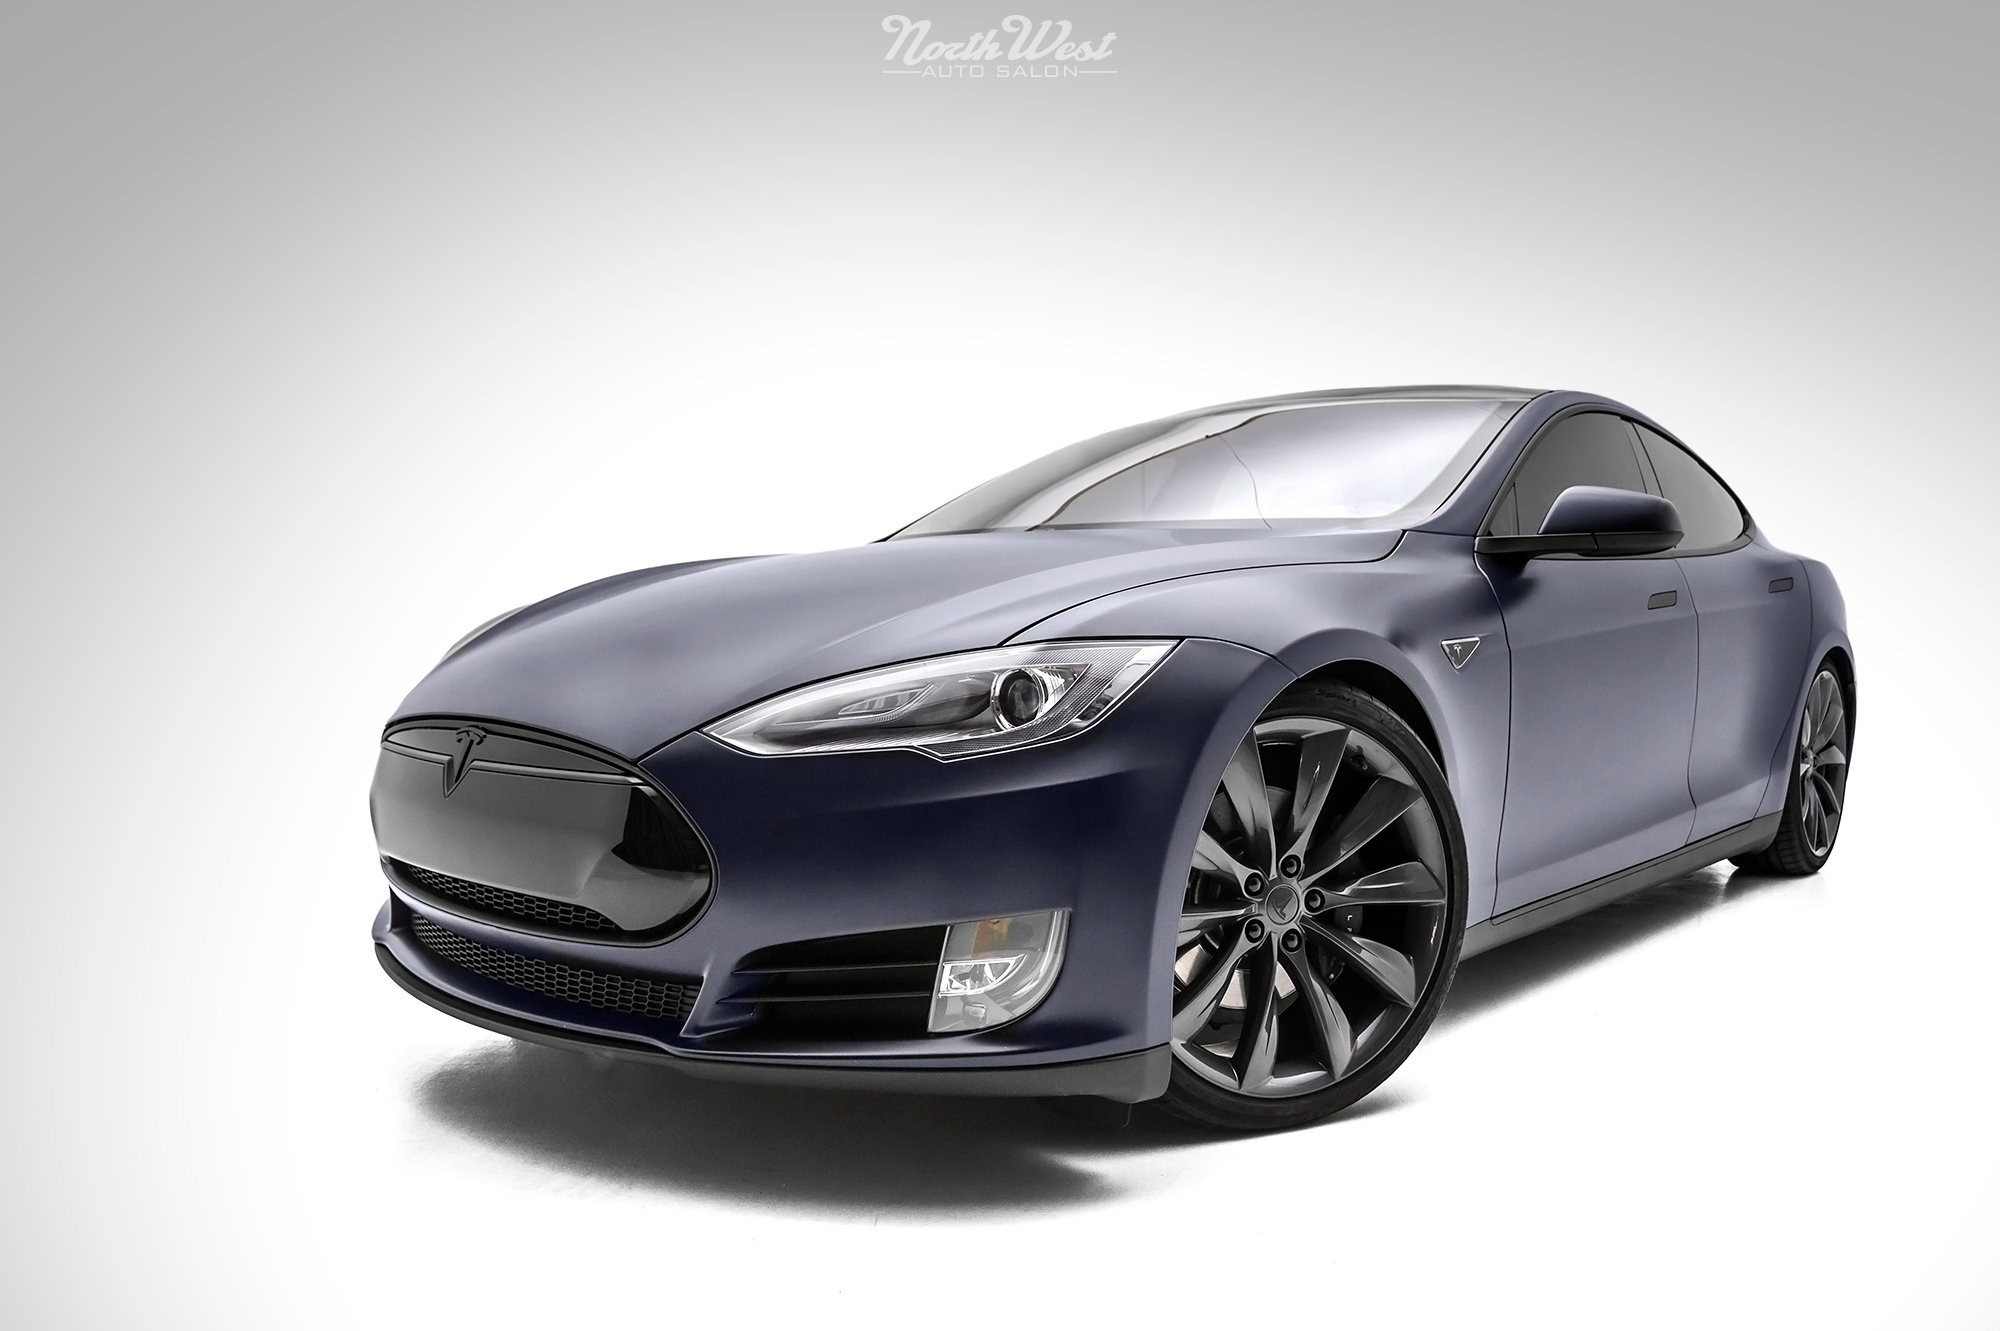 tesla-model-s-signature-wrapped-satin-xpel-stealth-paint-protection-clear-bra-northwest-auto-sal.jpg